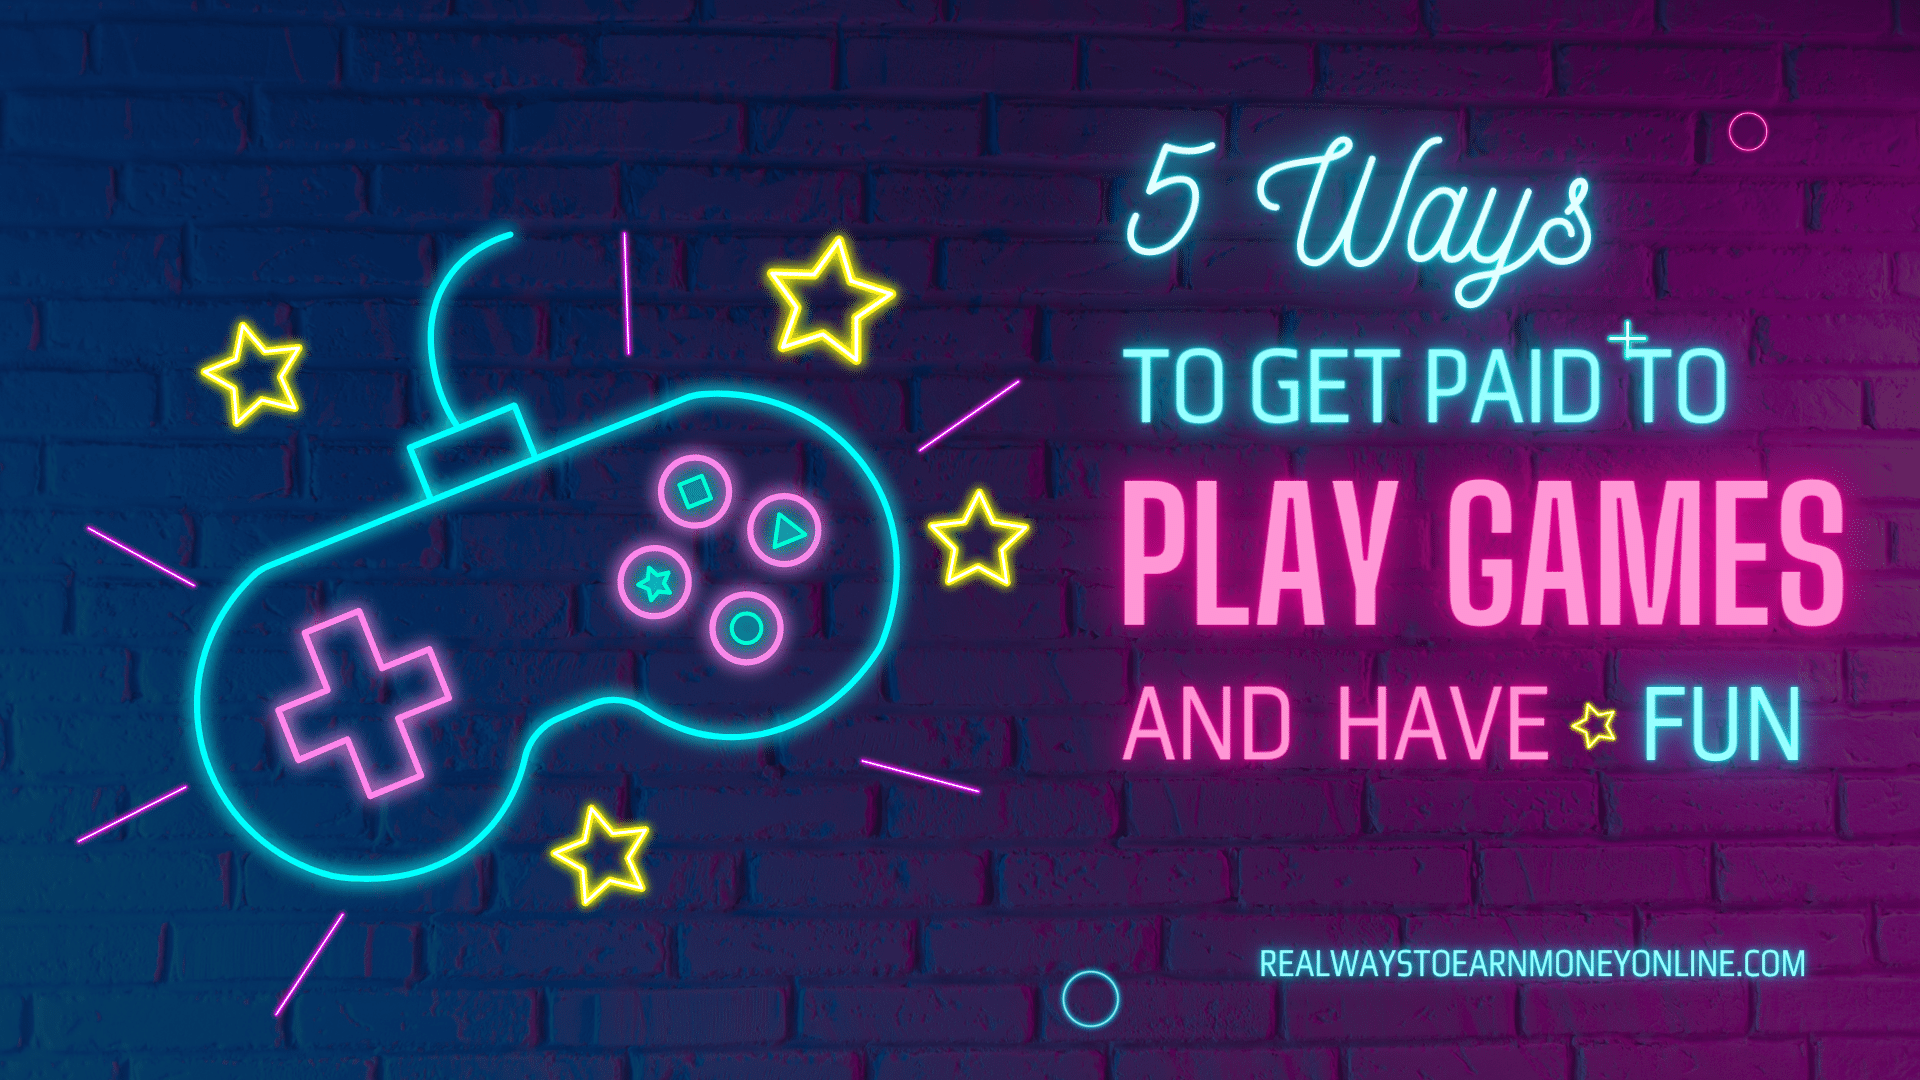 How to get paid to play games.